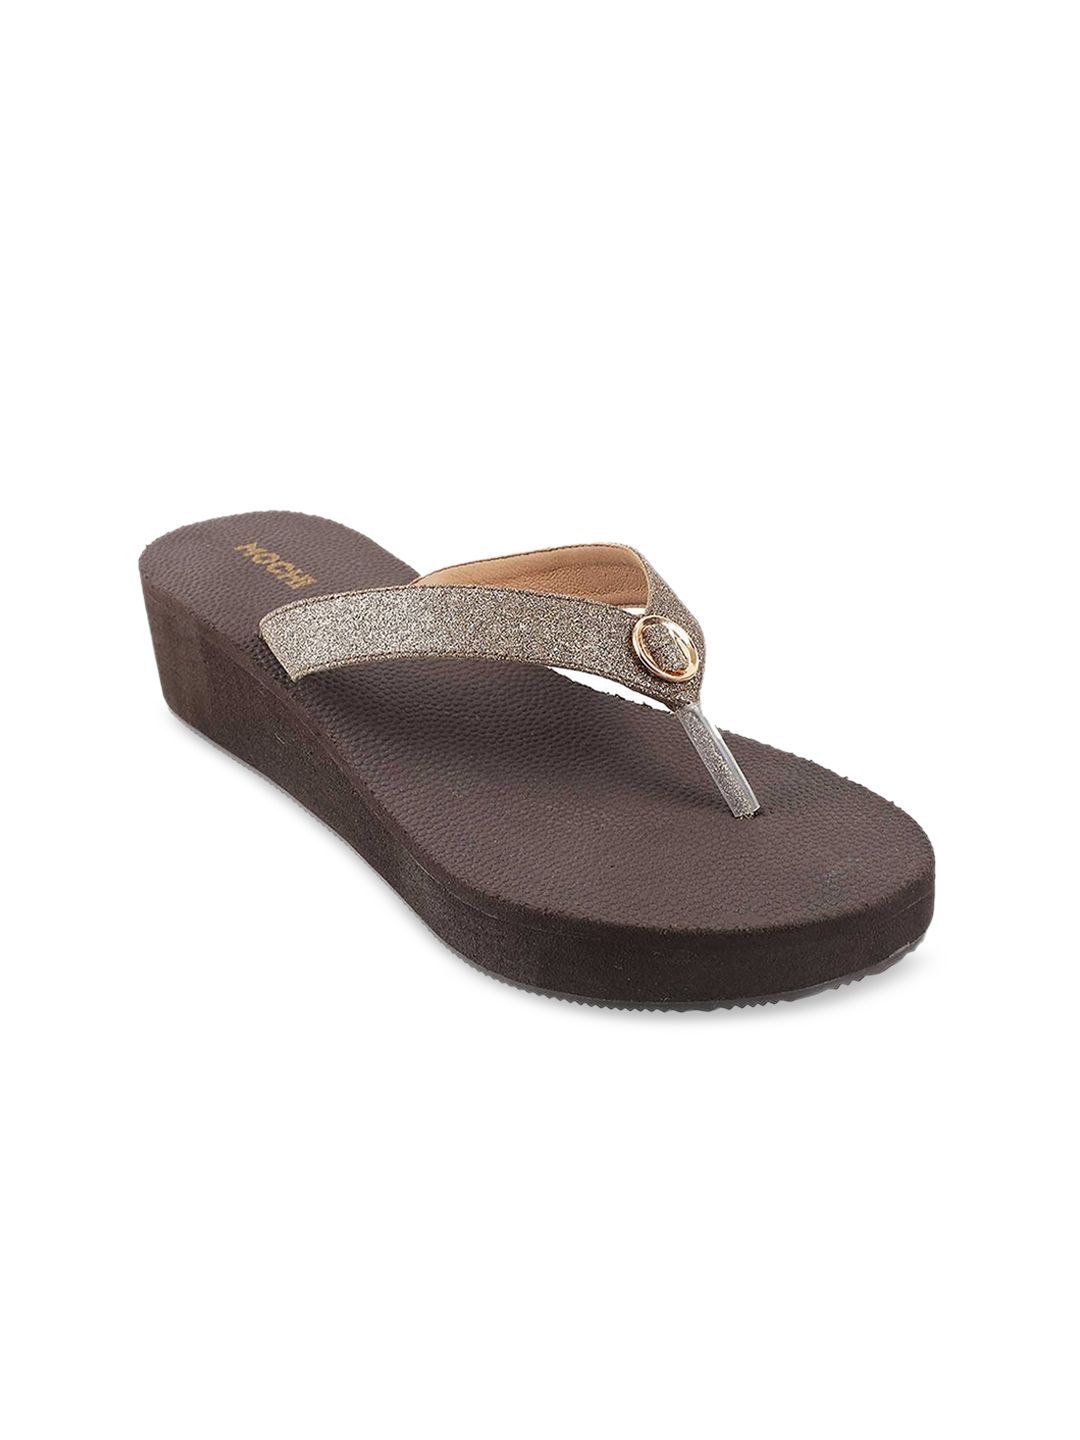 Mochi Women Gold-Toned Solid Sandals Price in India